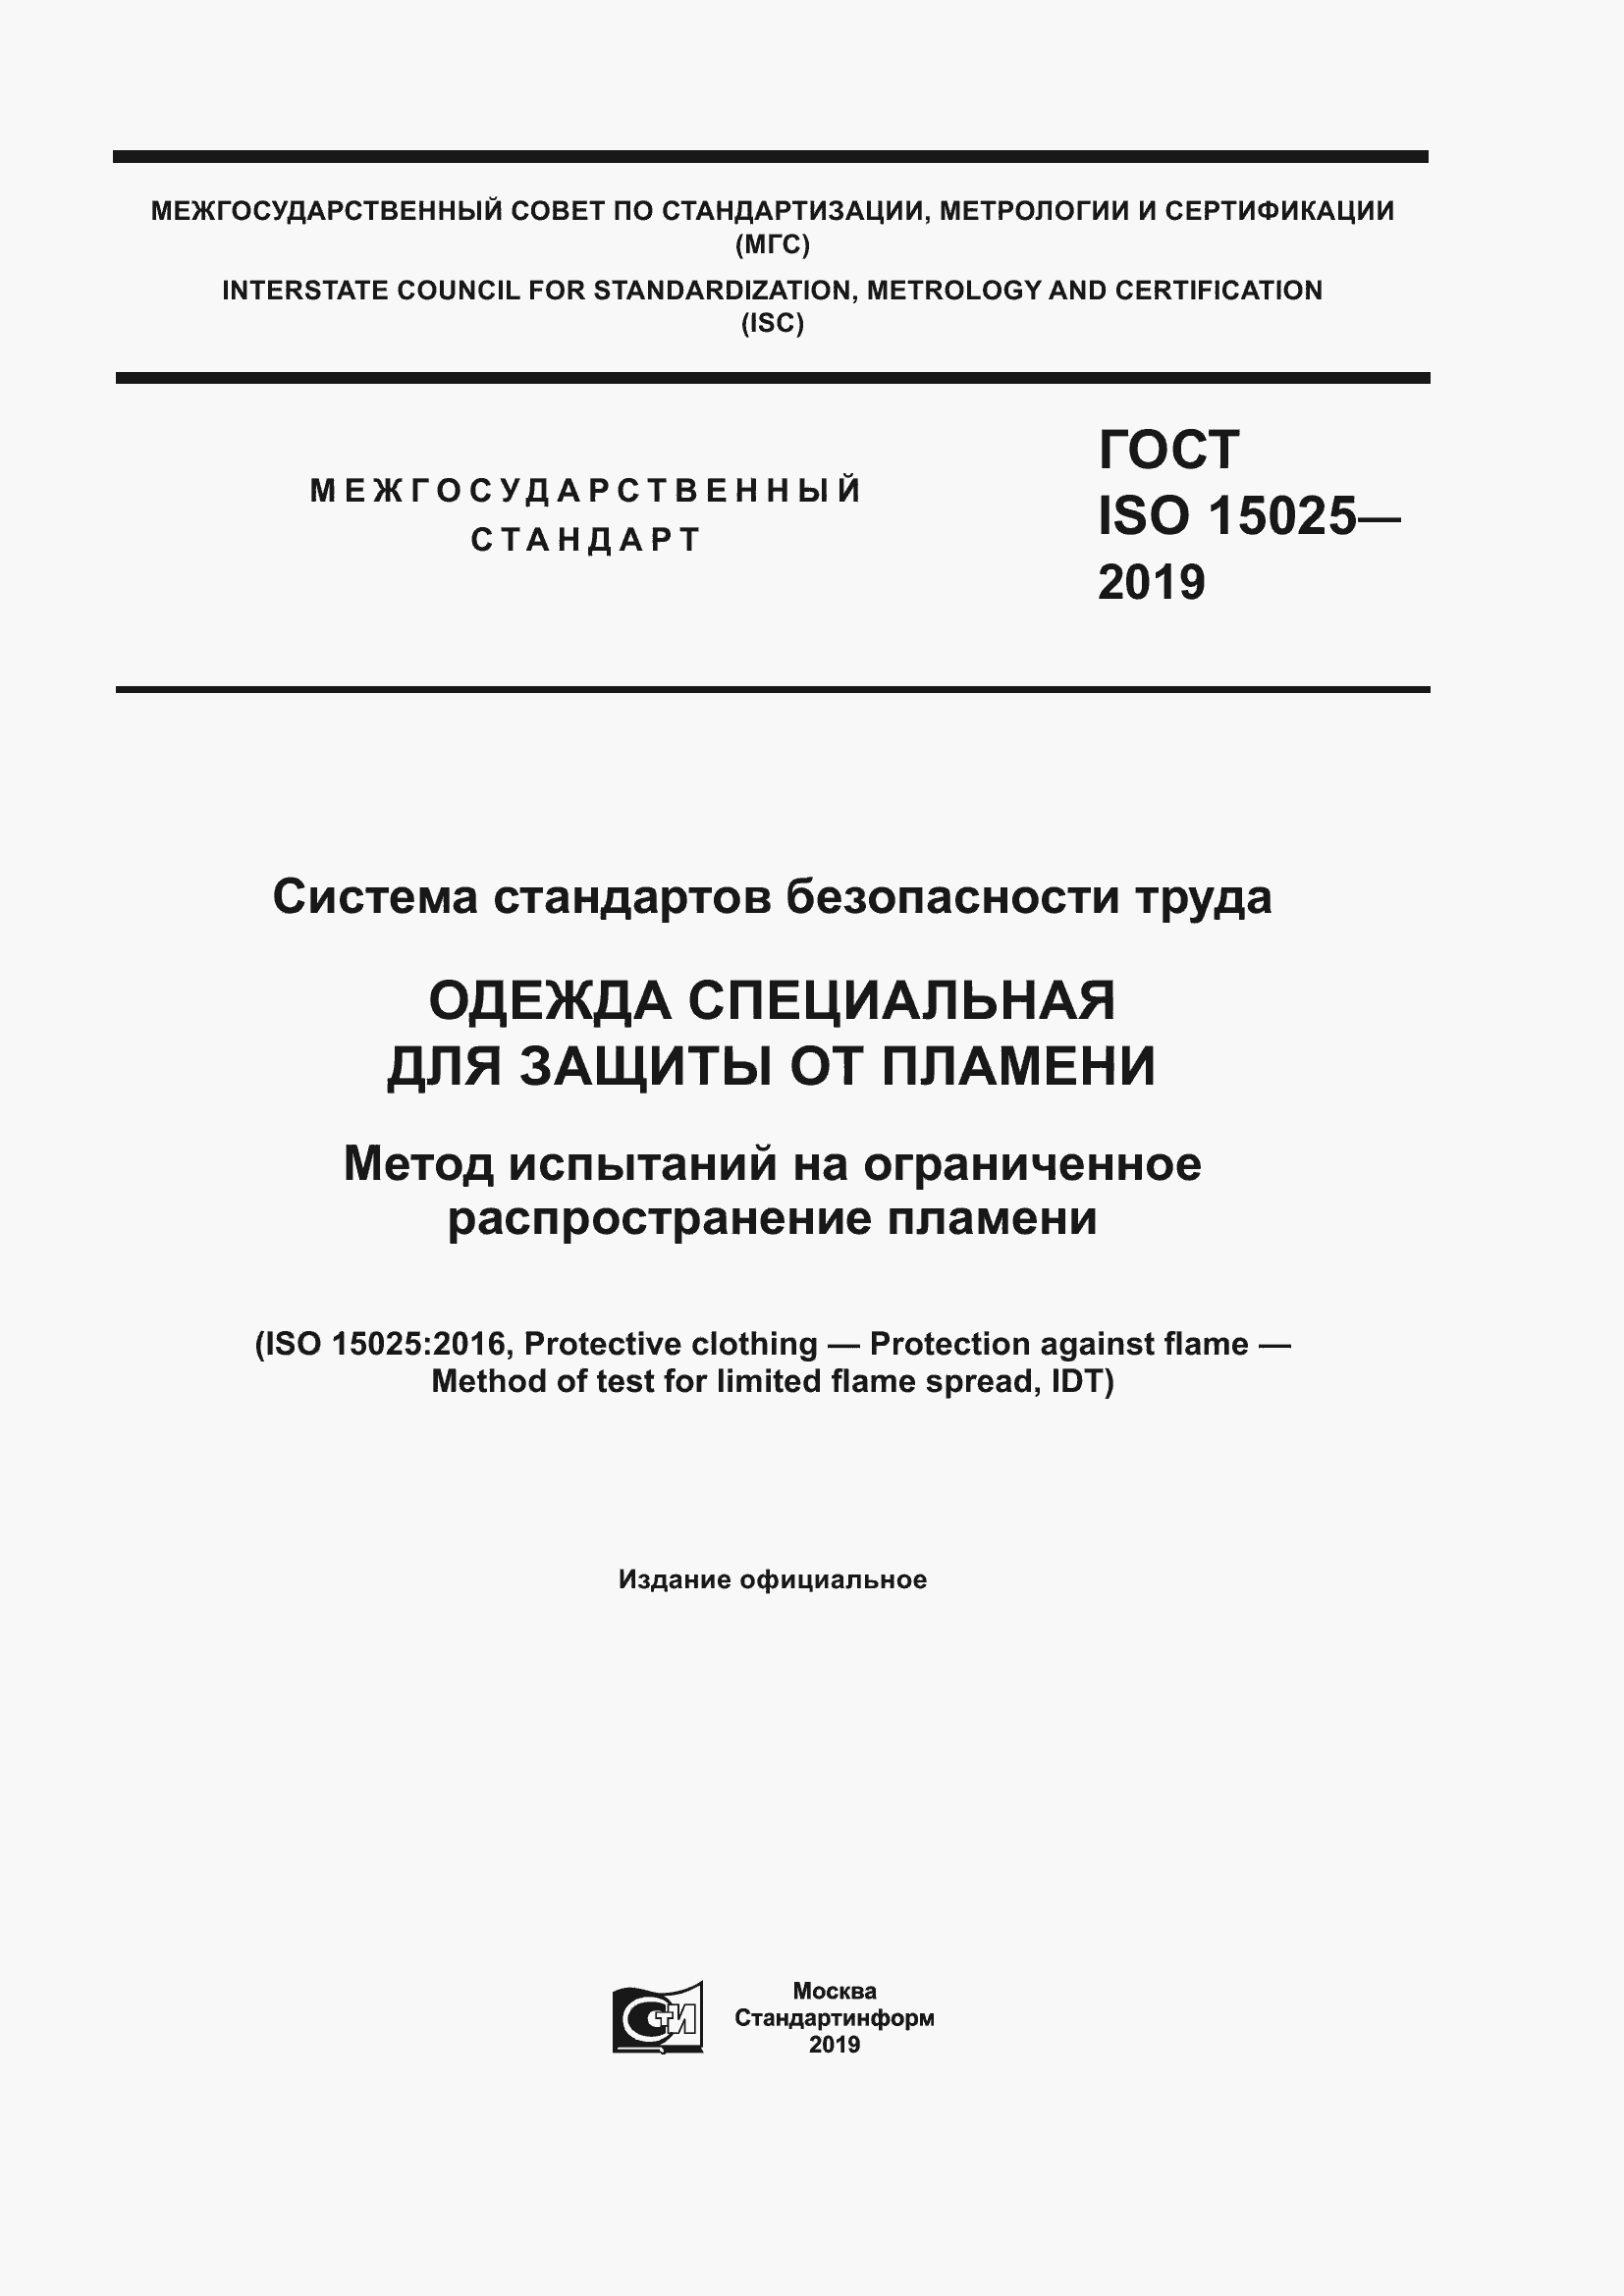  ISO 15025-2019.  1